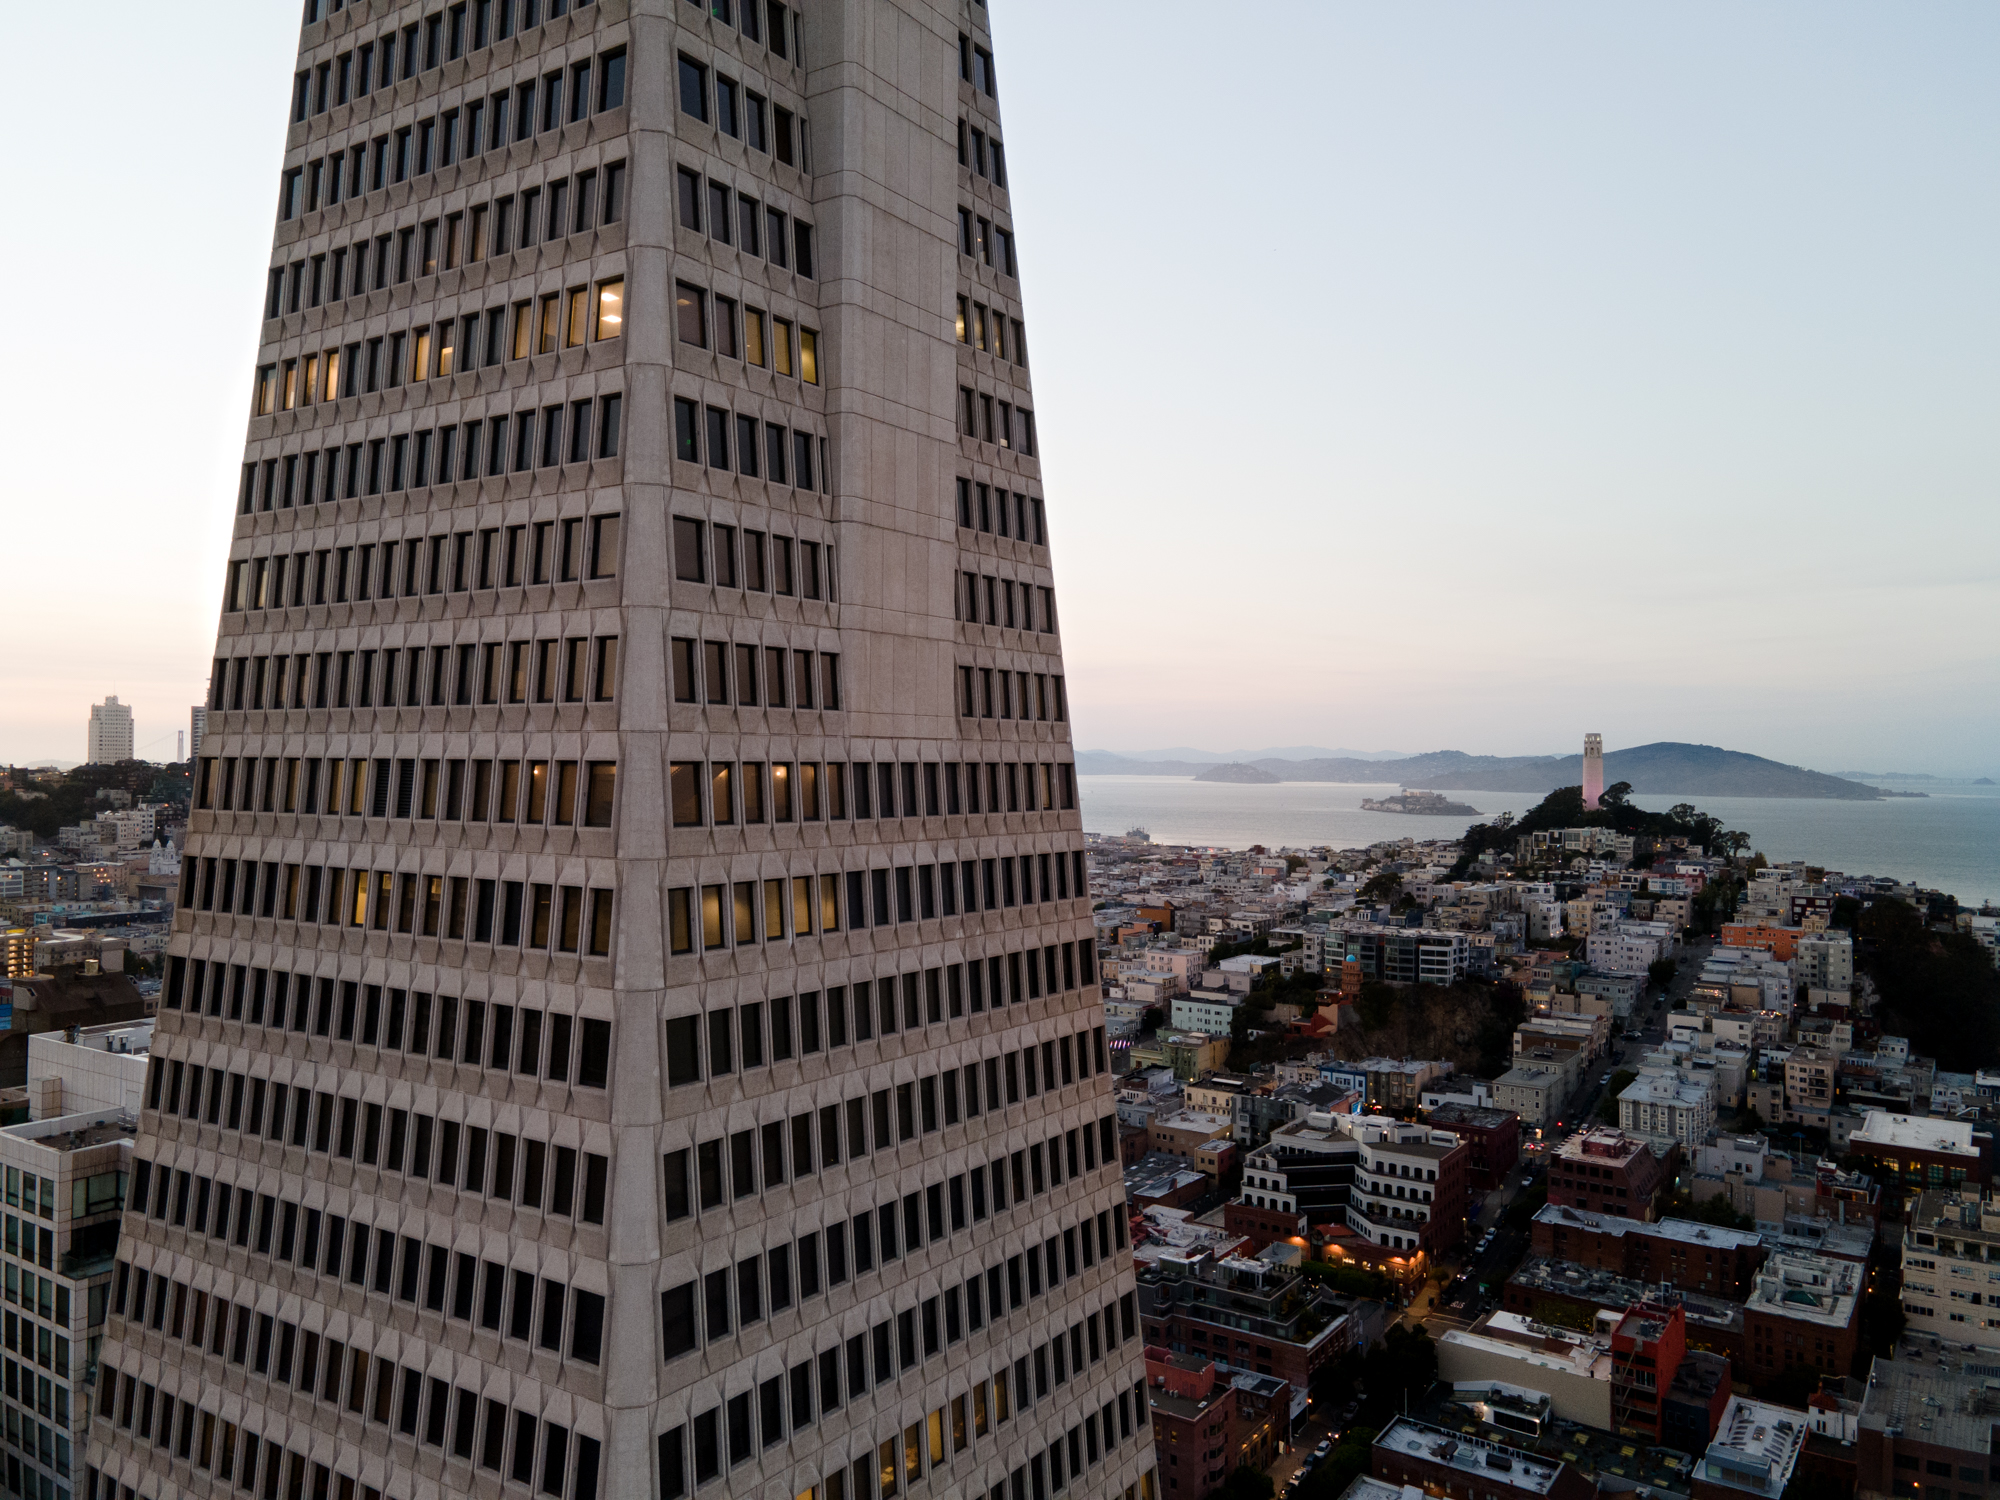 Transamerica Pyramid with the Golden Gate Bridge (left) Coit Tower (right) in the background